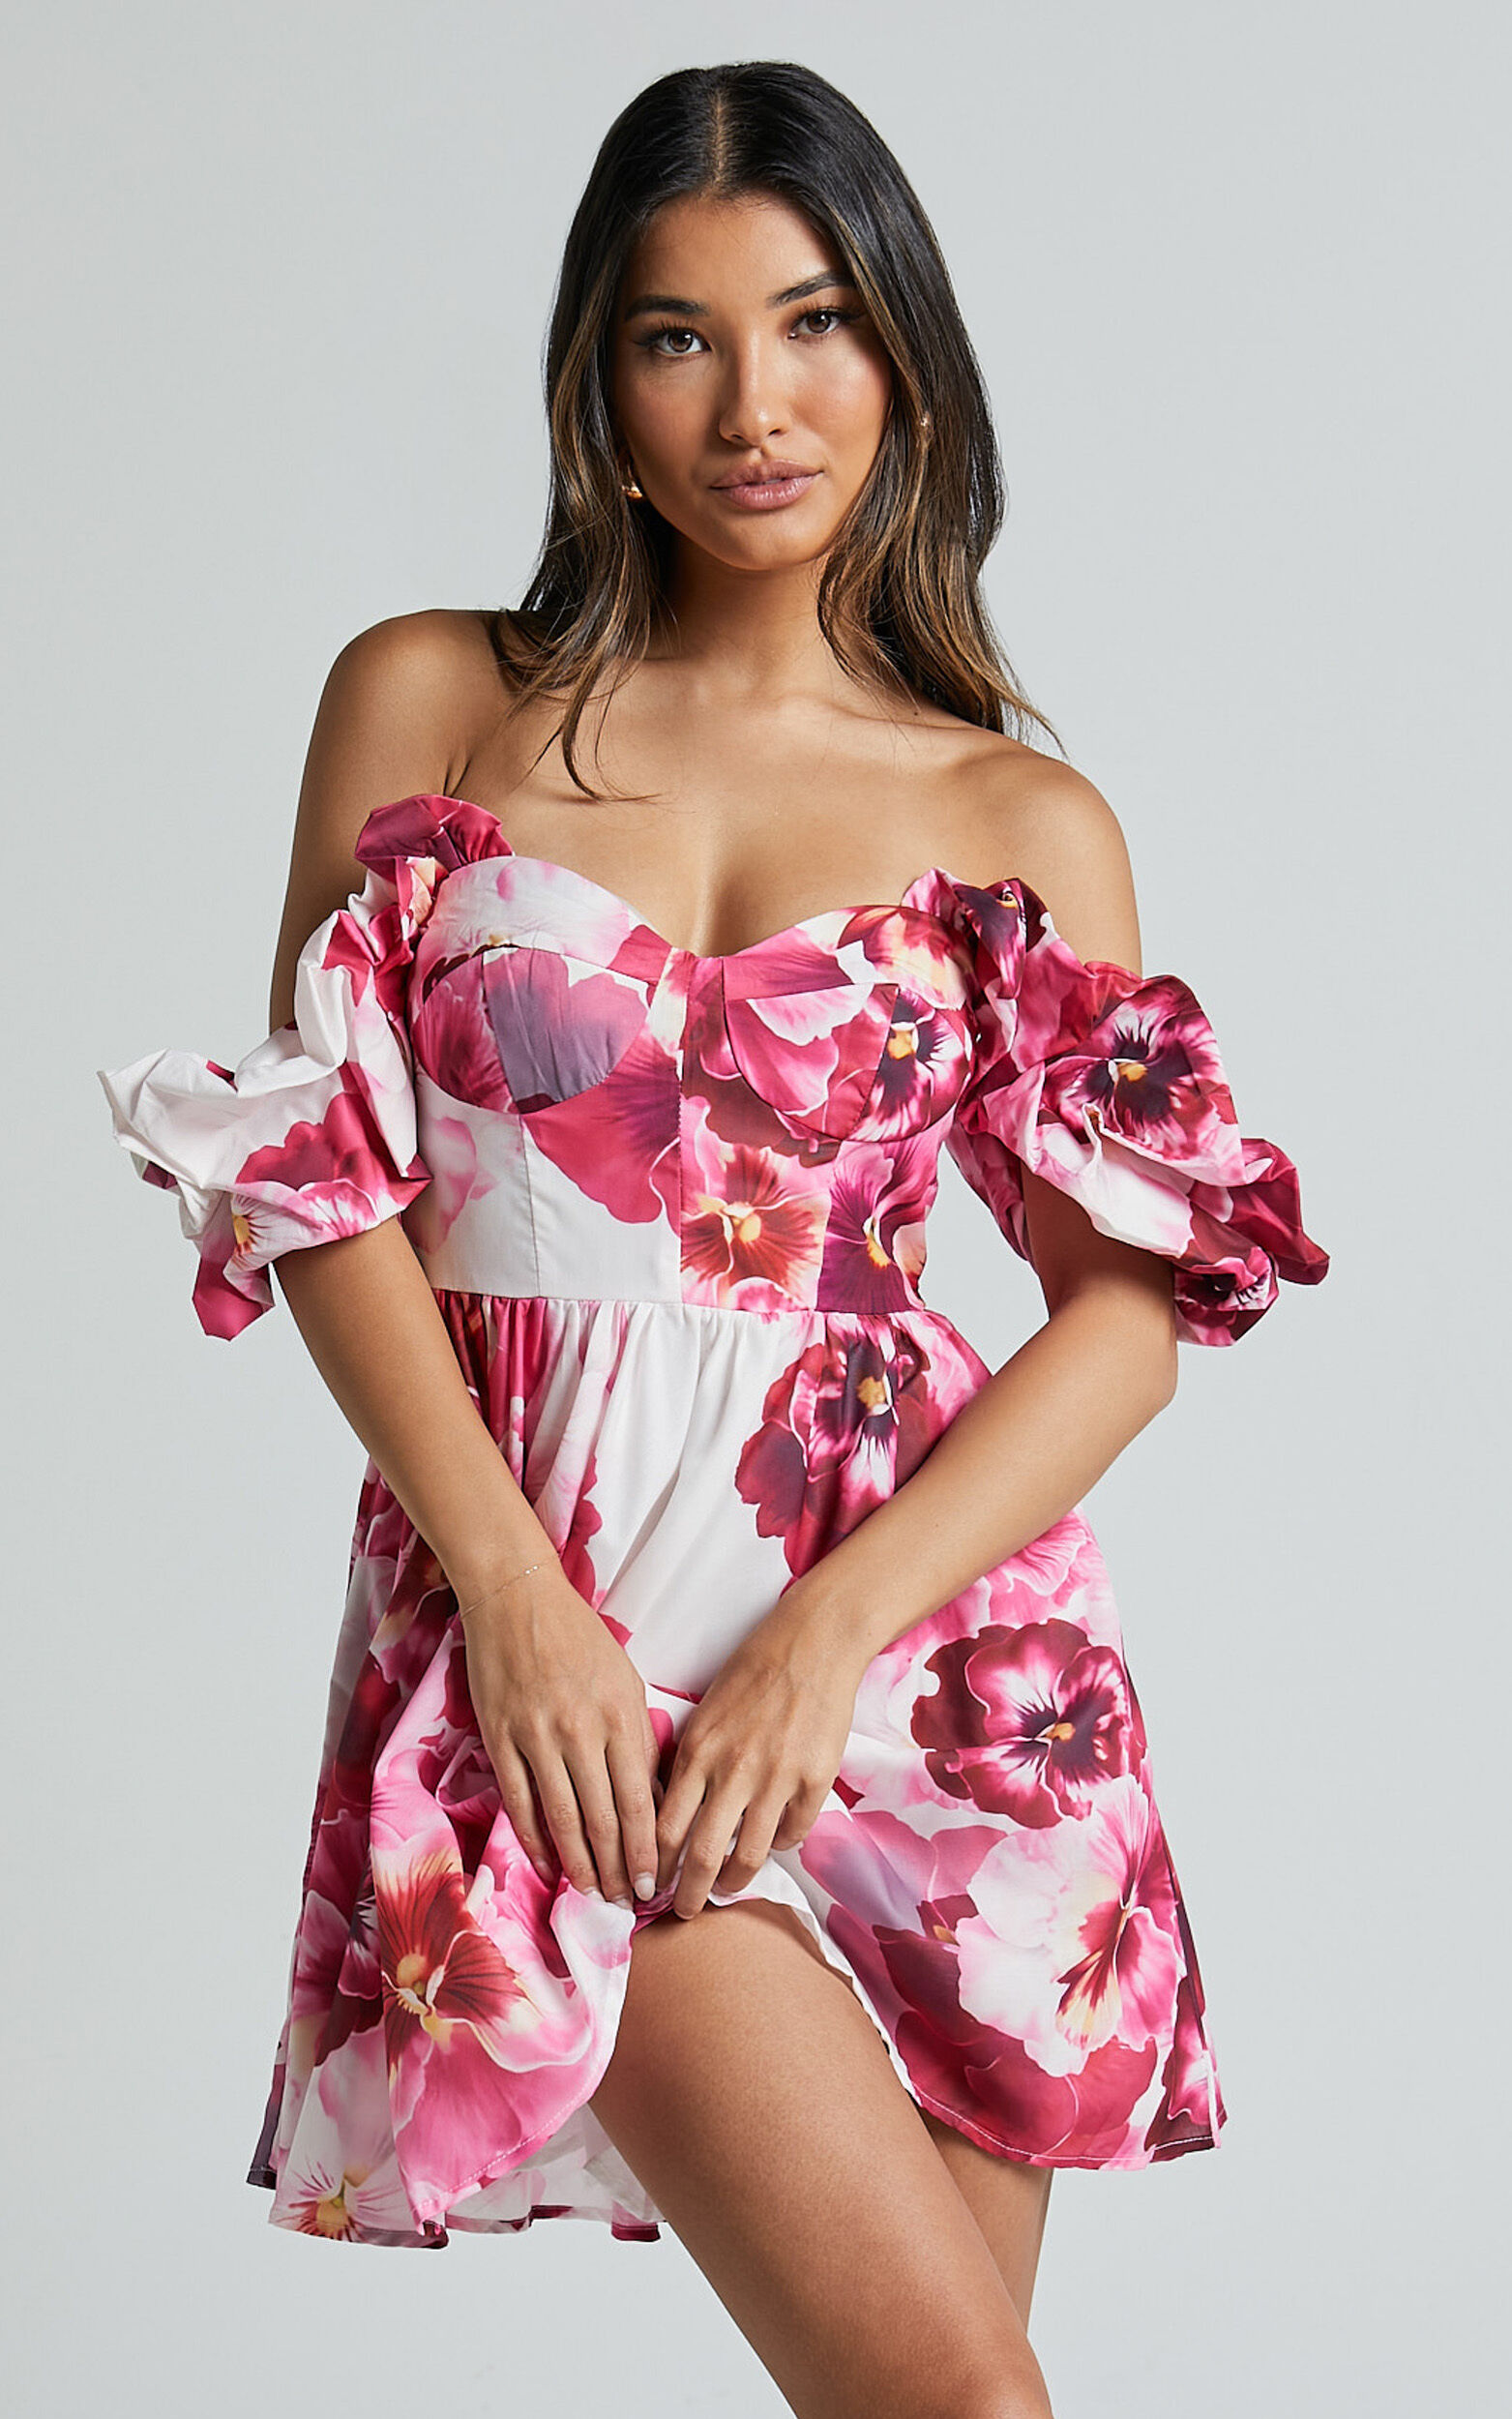 Cheryl Mini Dress - Off the Shoulder Sweetheart Flare in Fiesta Floral Pink - 06, PNK1